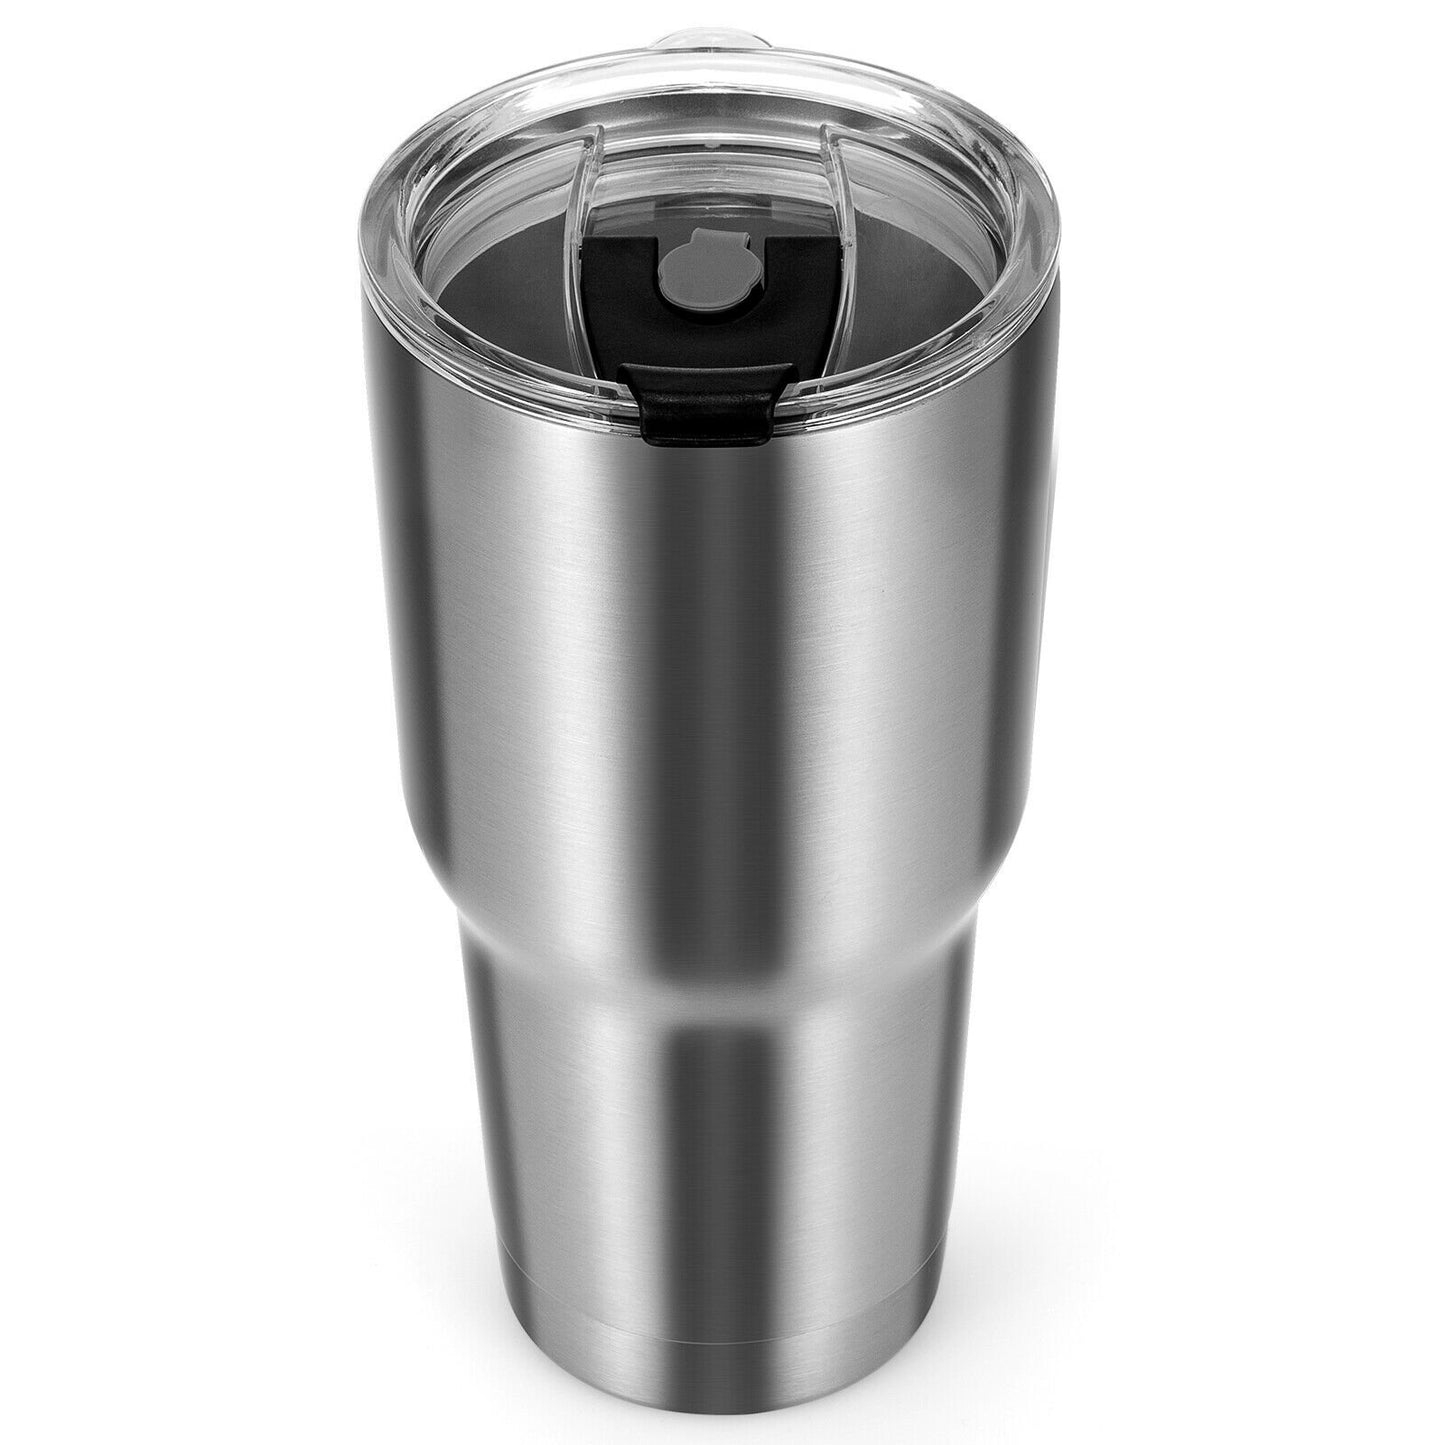 30oz Stainless Steel Tumbler Cup Double Wall Vacuum Insulated Mug with Lid, Silver